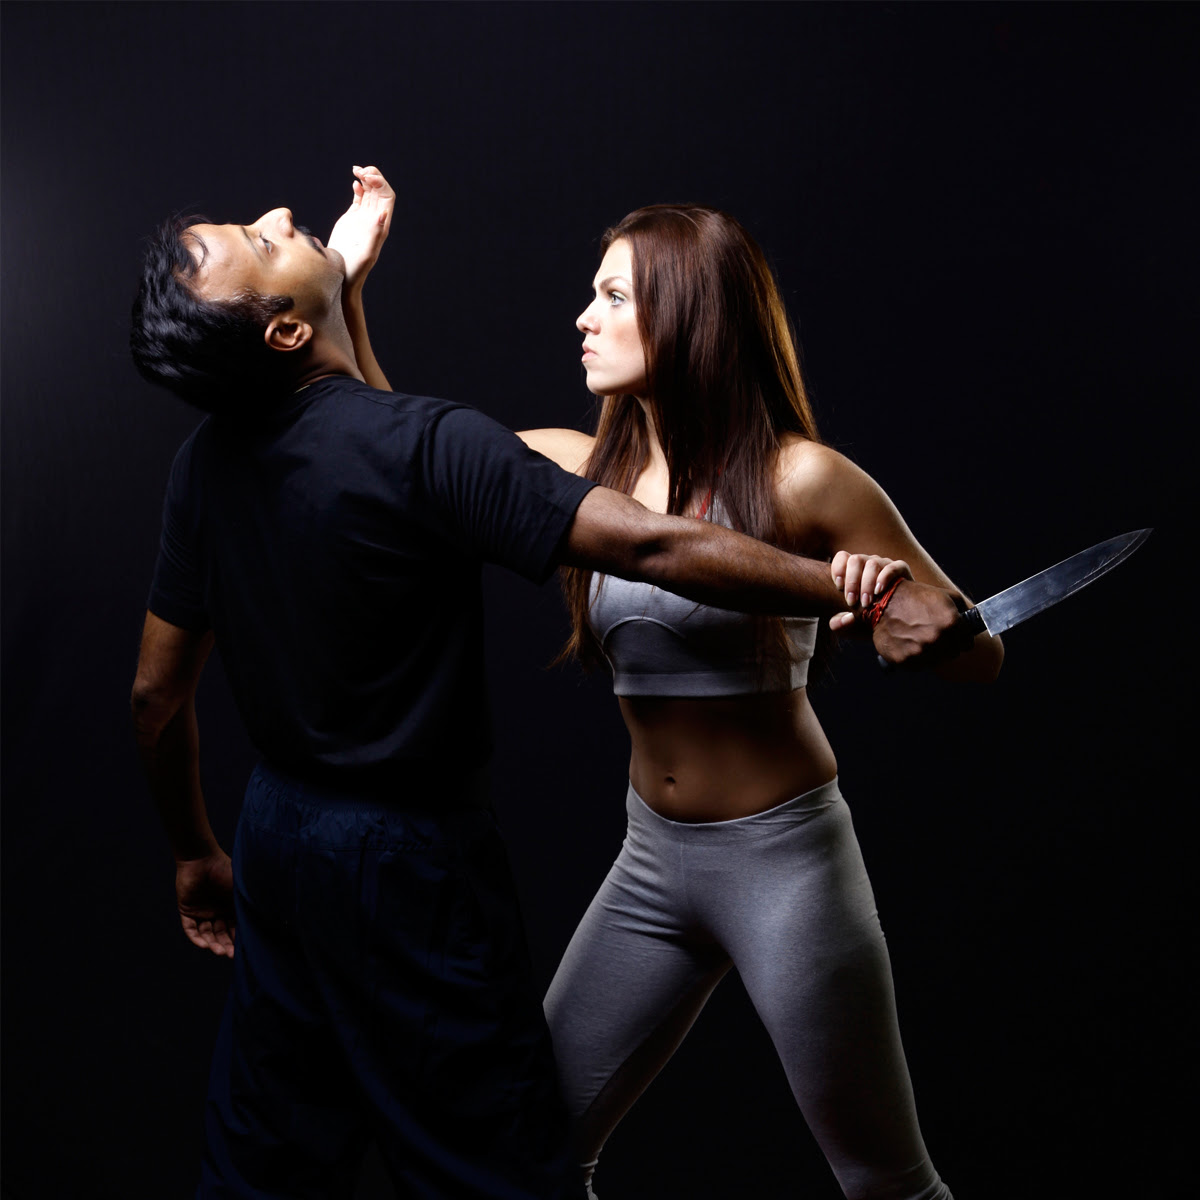 Image result for self-defense tips every woman should know